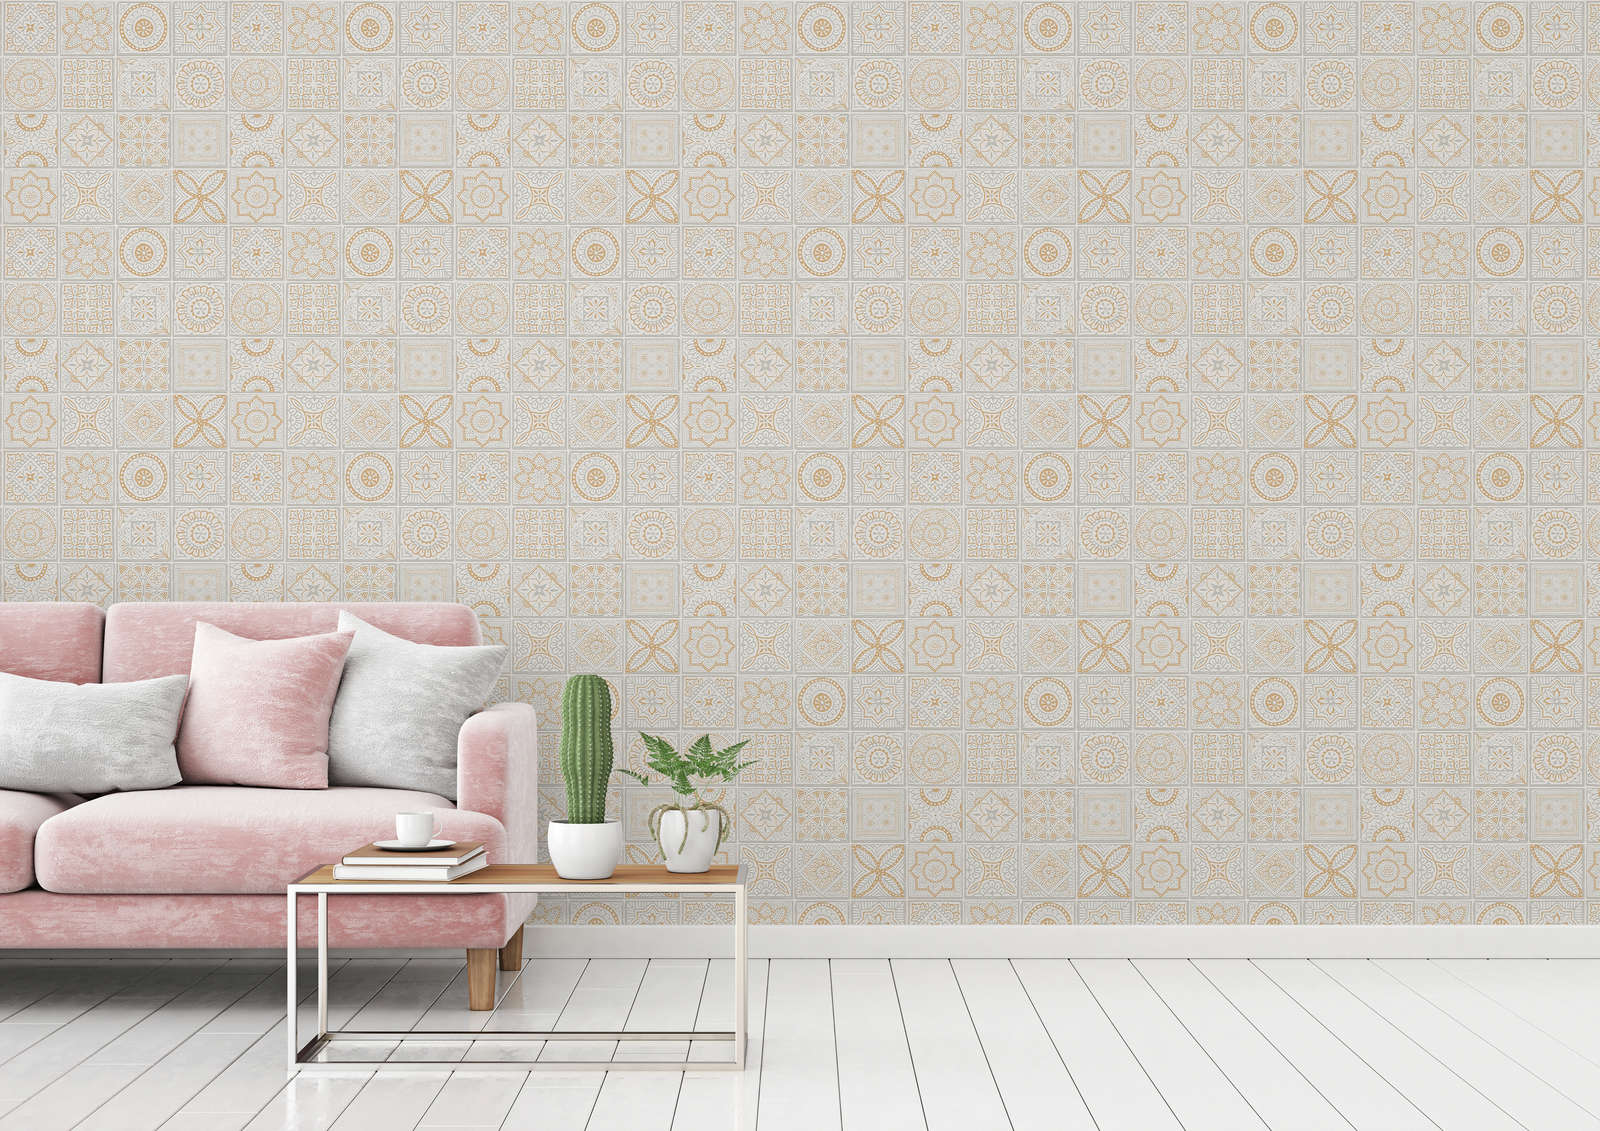             Tile look non-woven wallpaper with floral mosaics - gold, grey, white
        